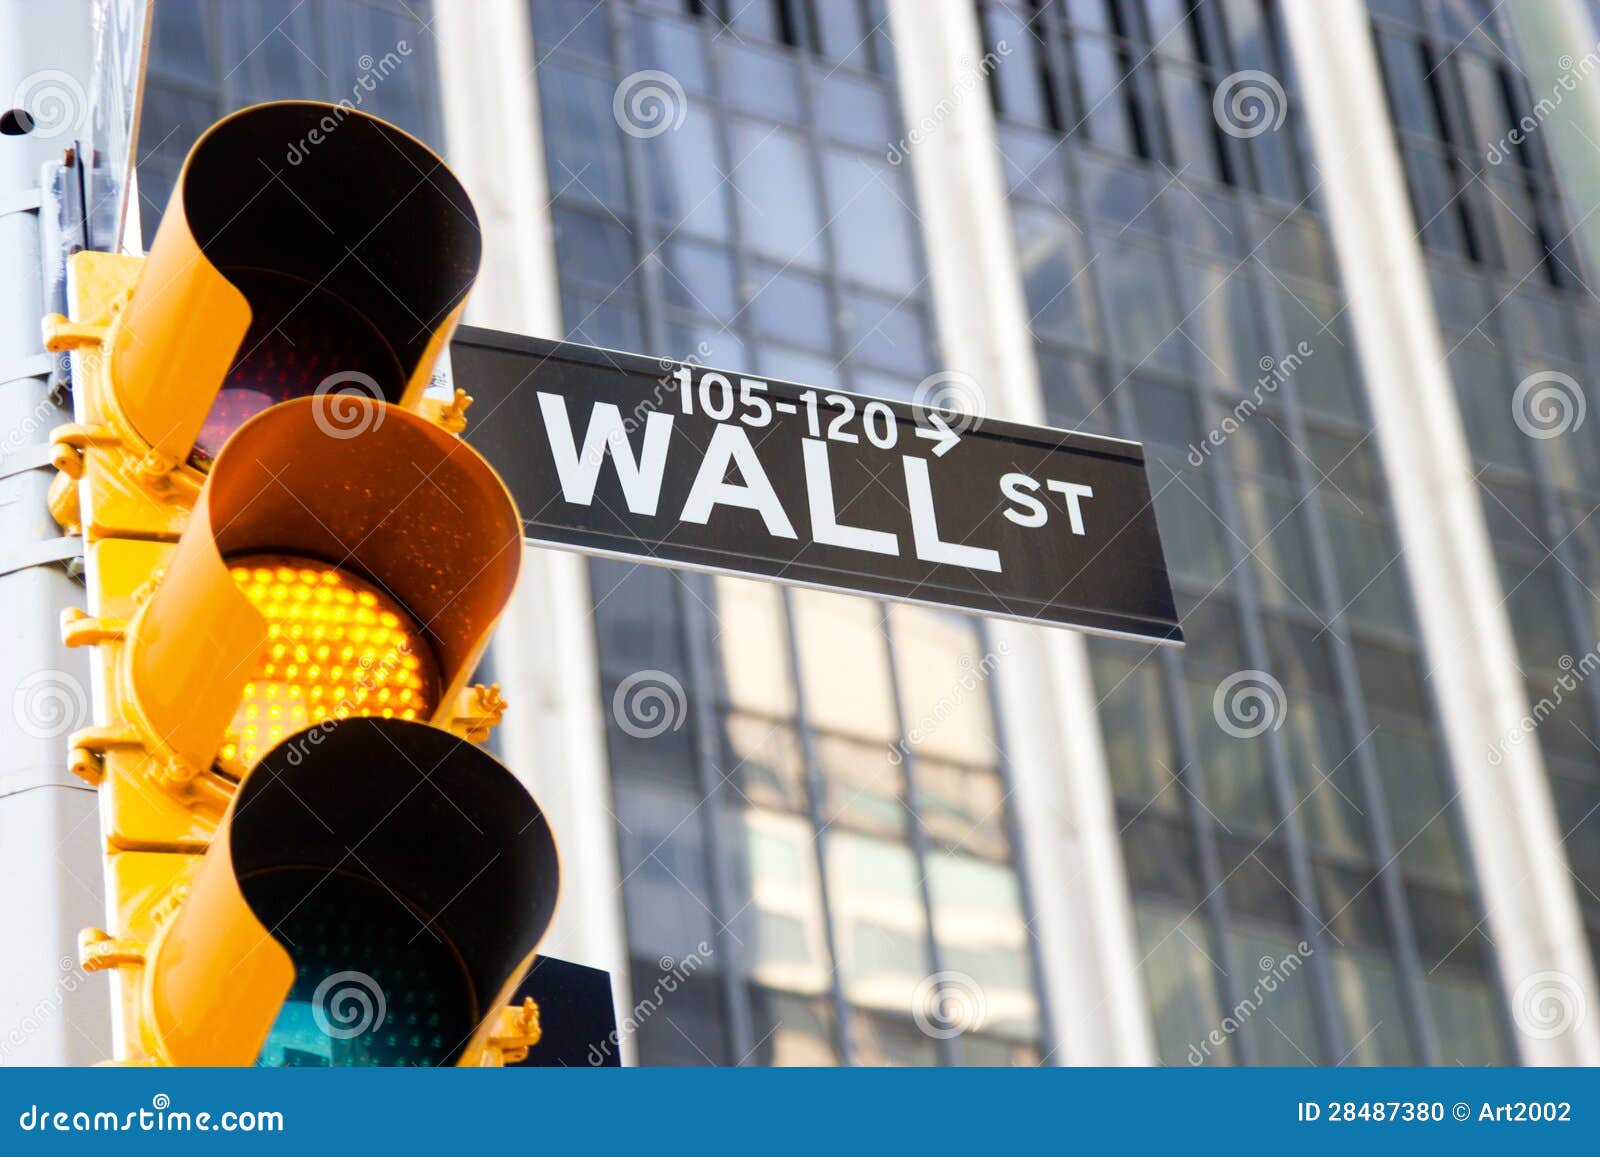 wall street sign and yellow traffic light, new york